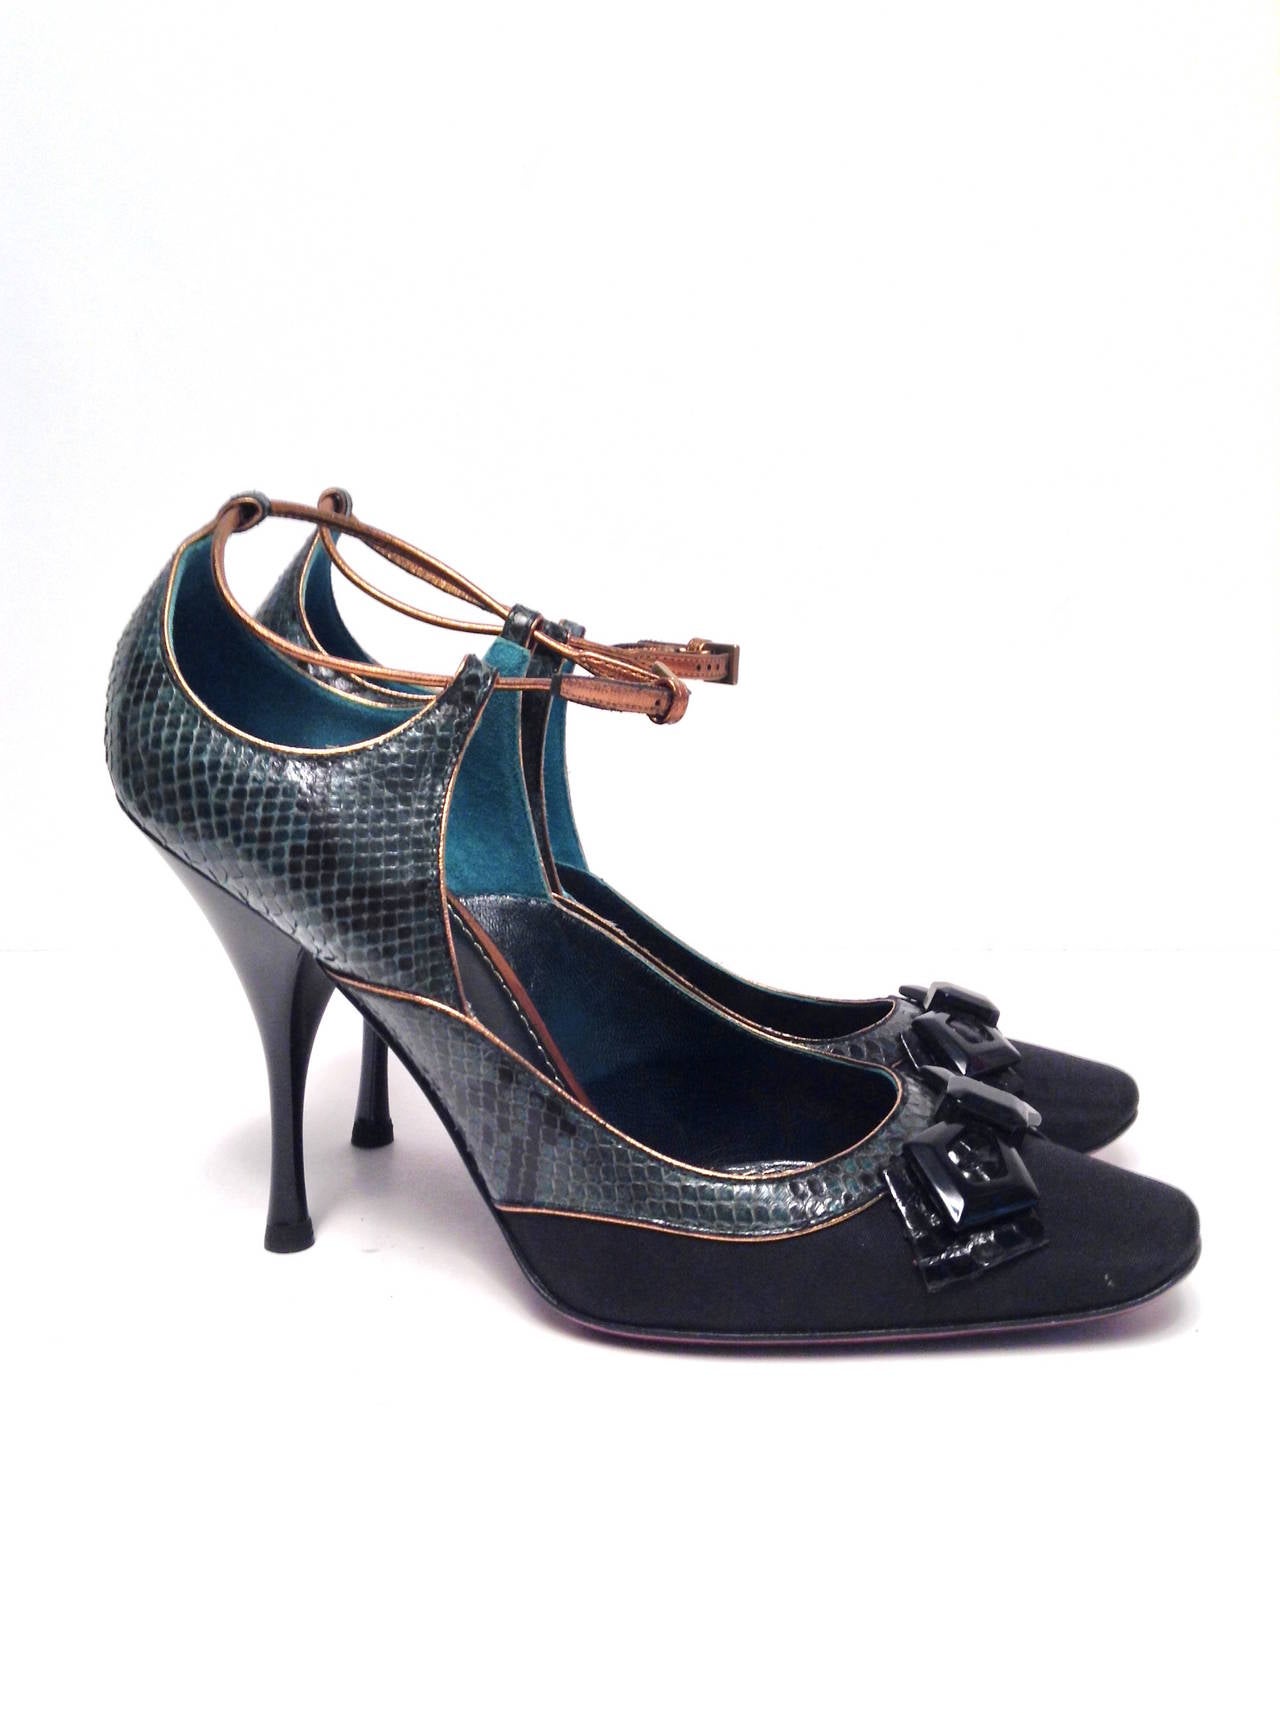 Stunning green python, black silk, and gold leather piping adorn this spectacular shoe.

3.5